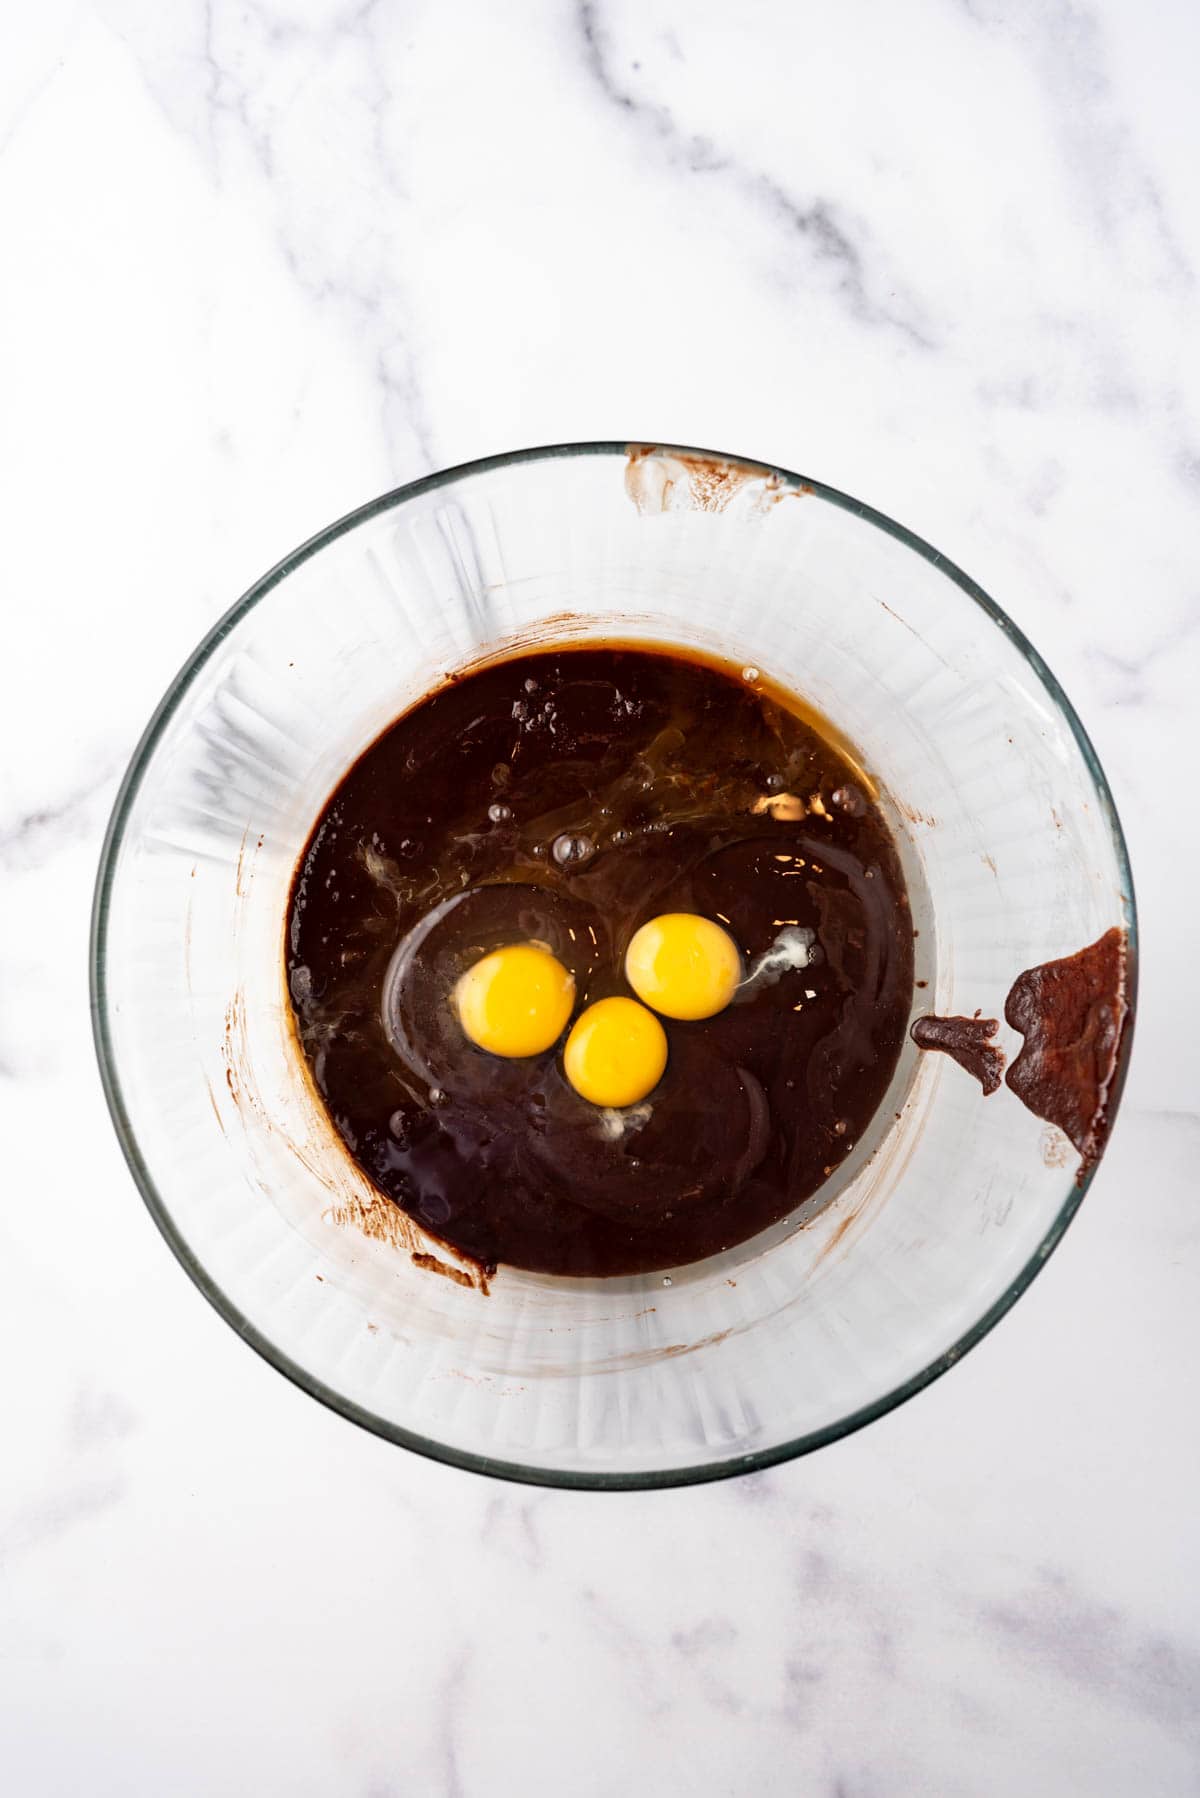 Adding three eggs to brownie batter.